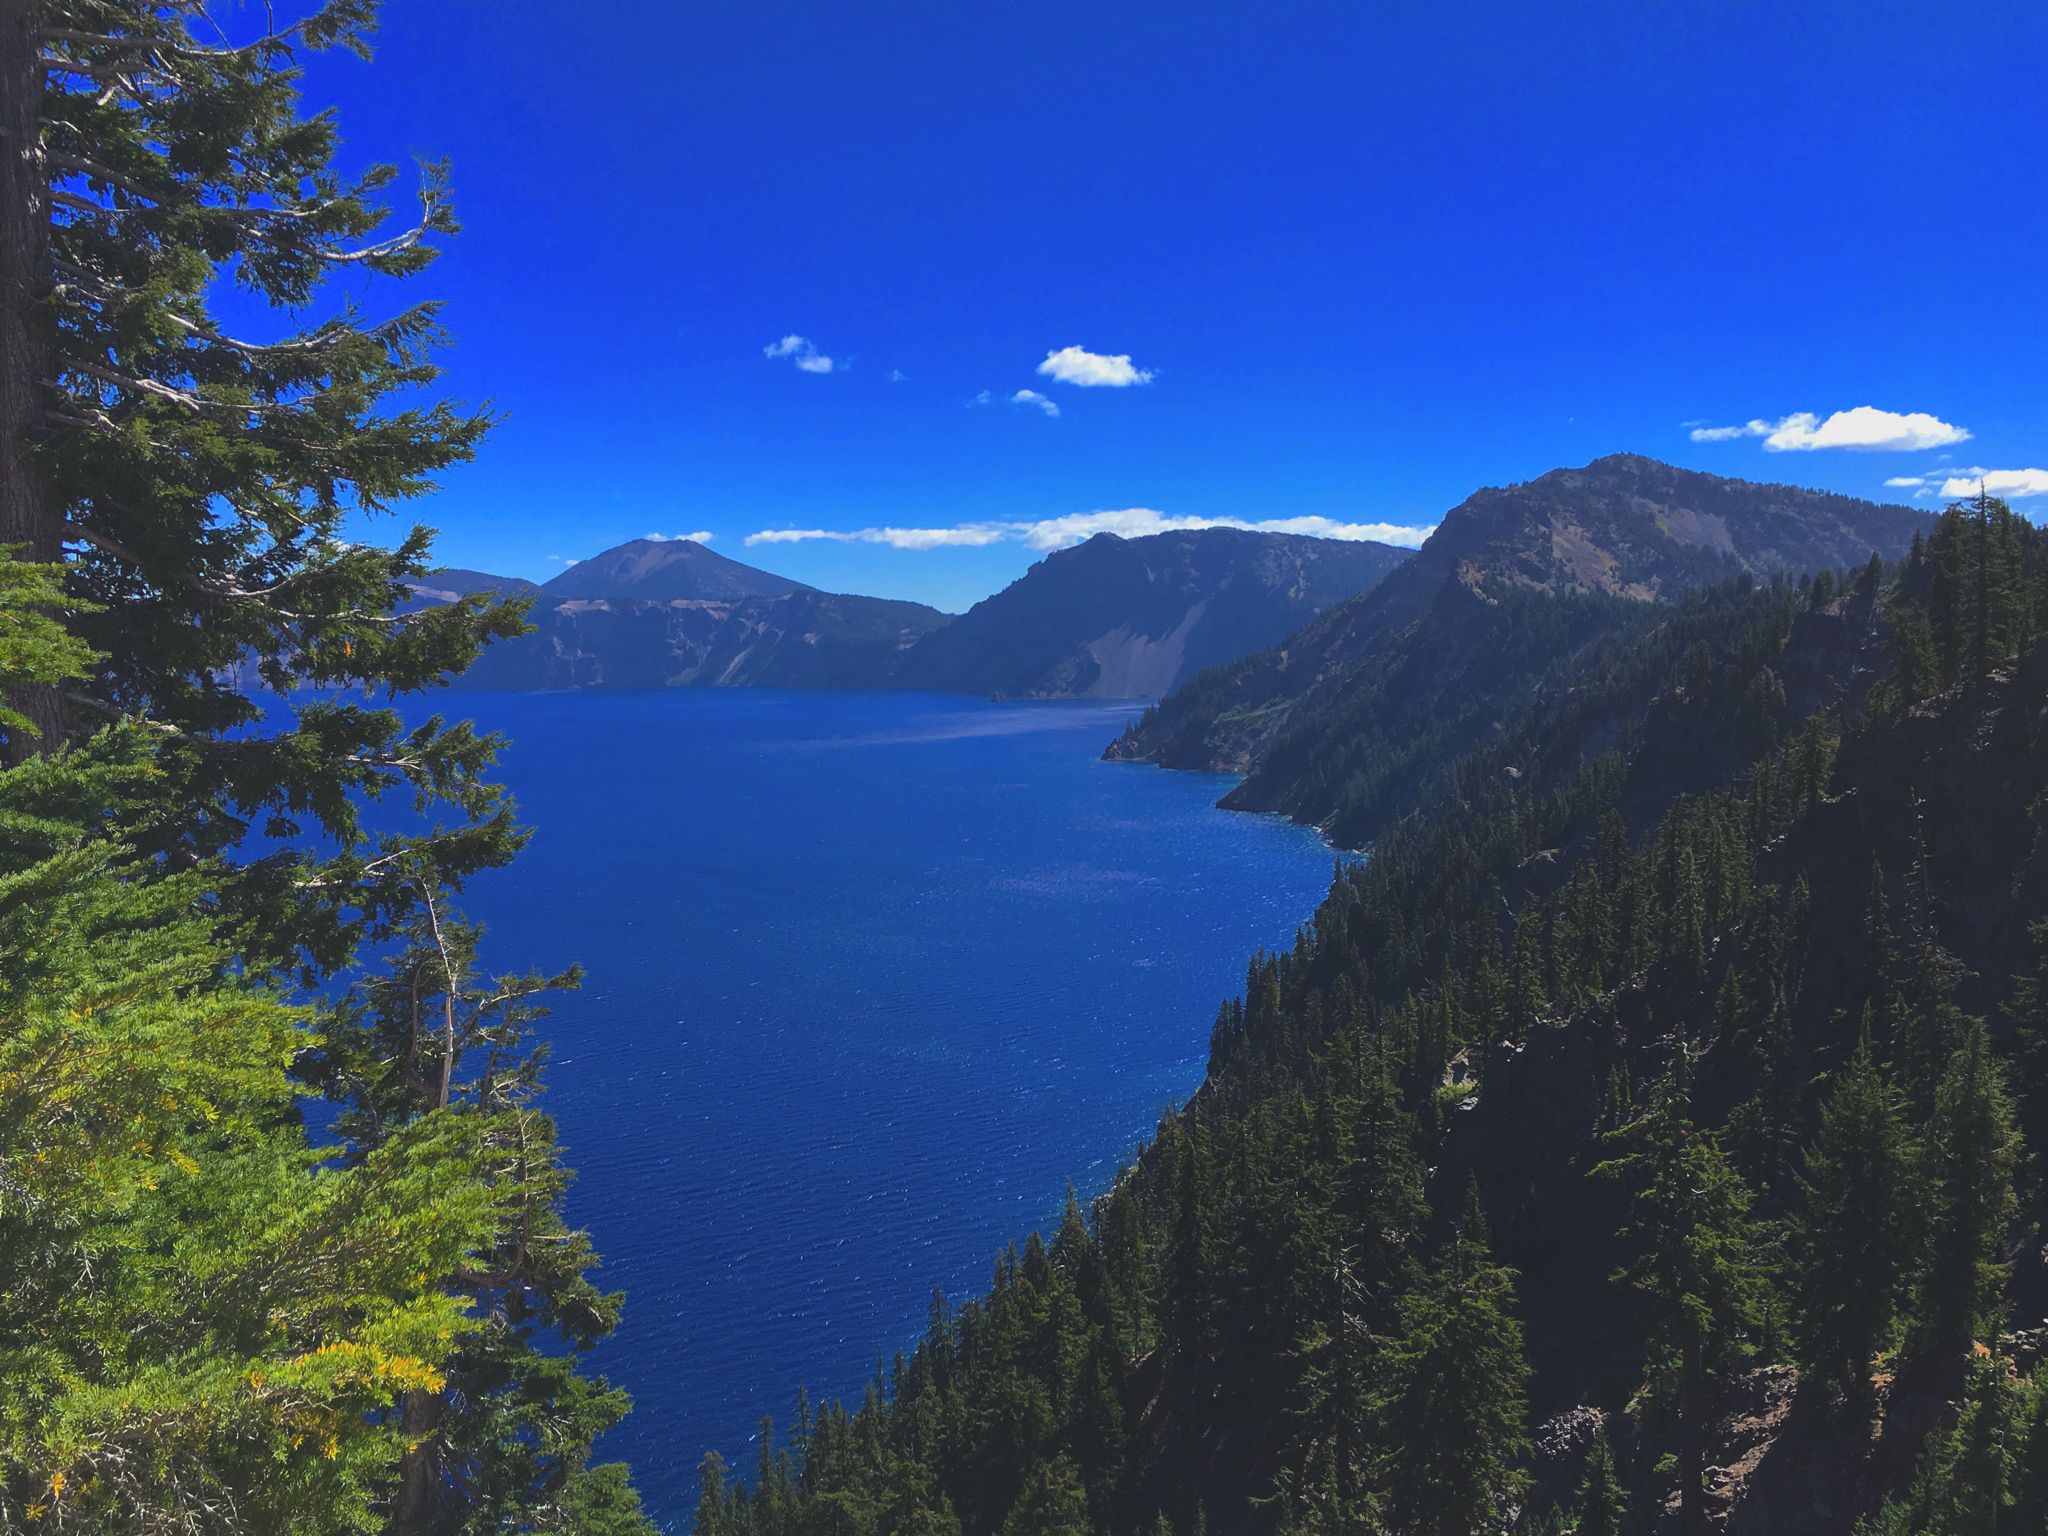 Deep blue of Crater Lake contrasted next to trees surrounding.